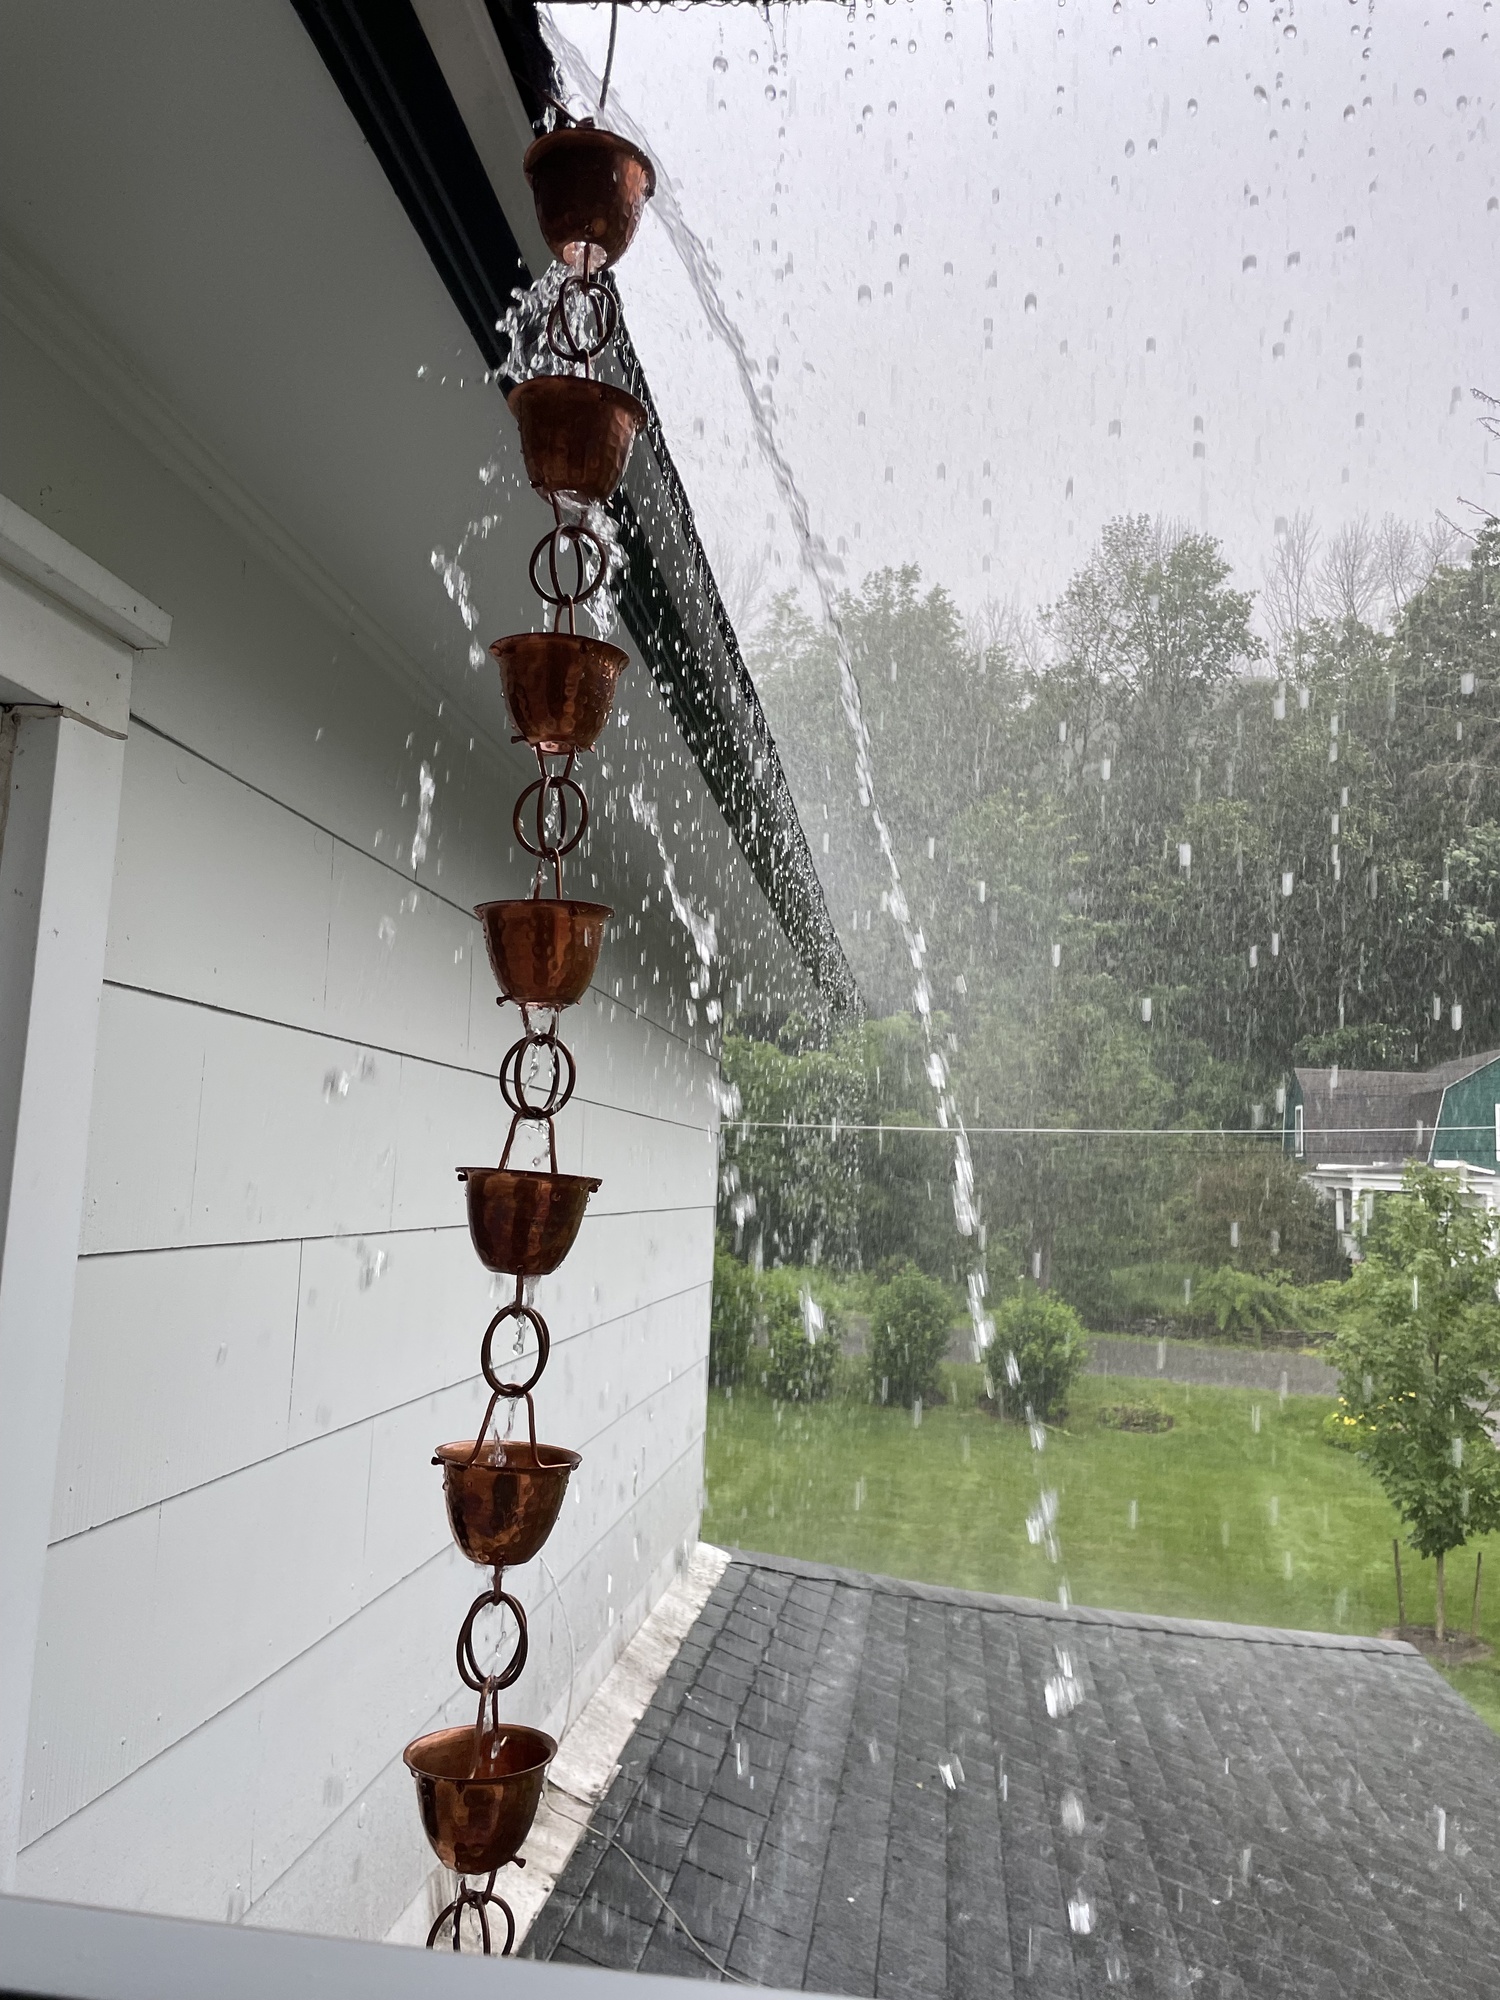 This rain chain works well in a light rain. However, as you can see, in a moderate to heavy rain the water overshoots the chain, making the device pointless. SHELLEY SMITH